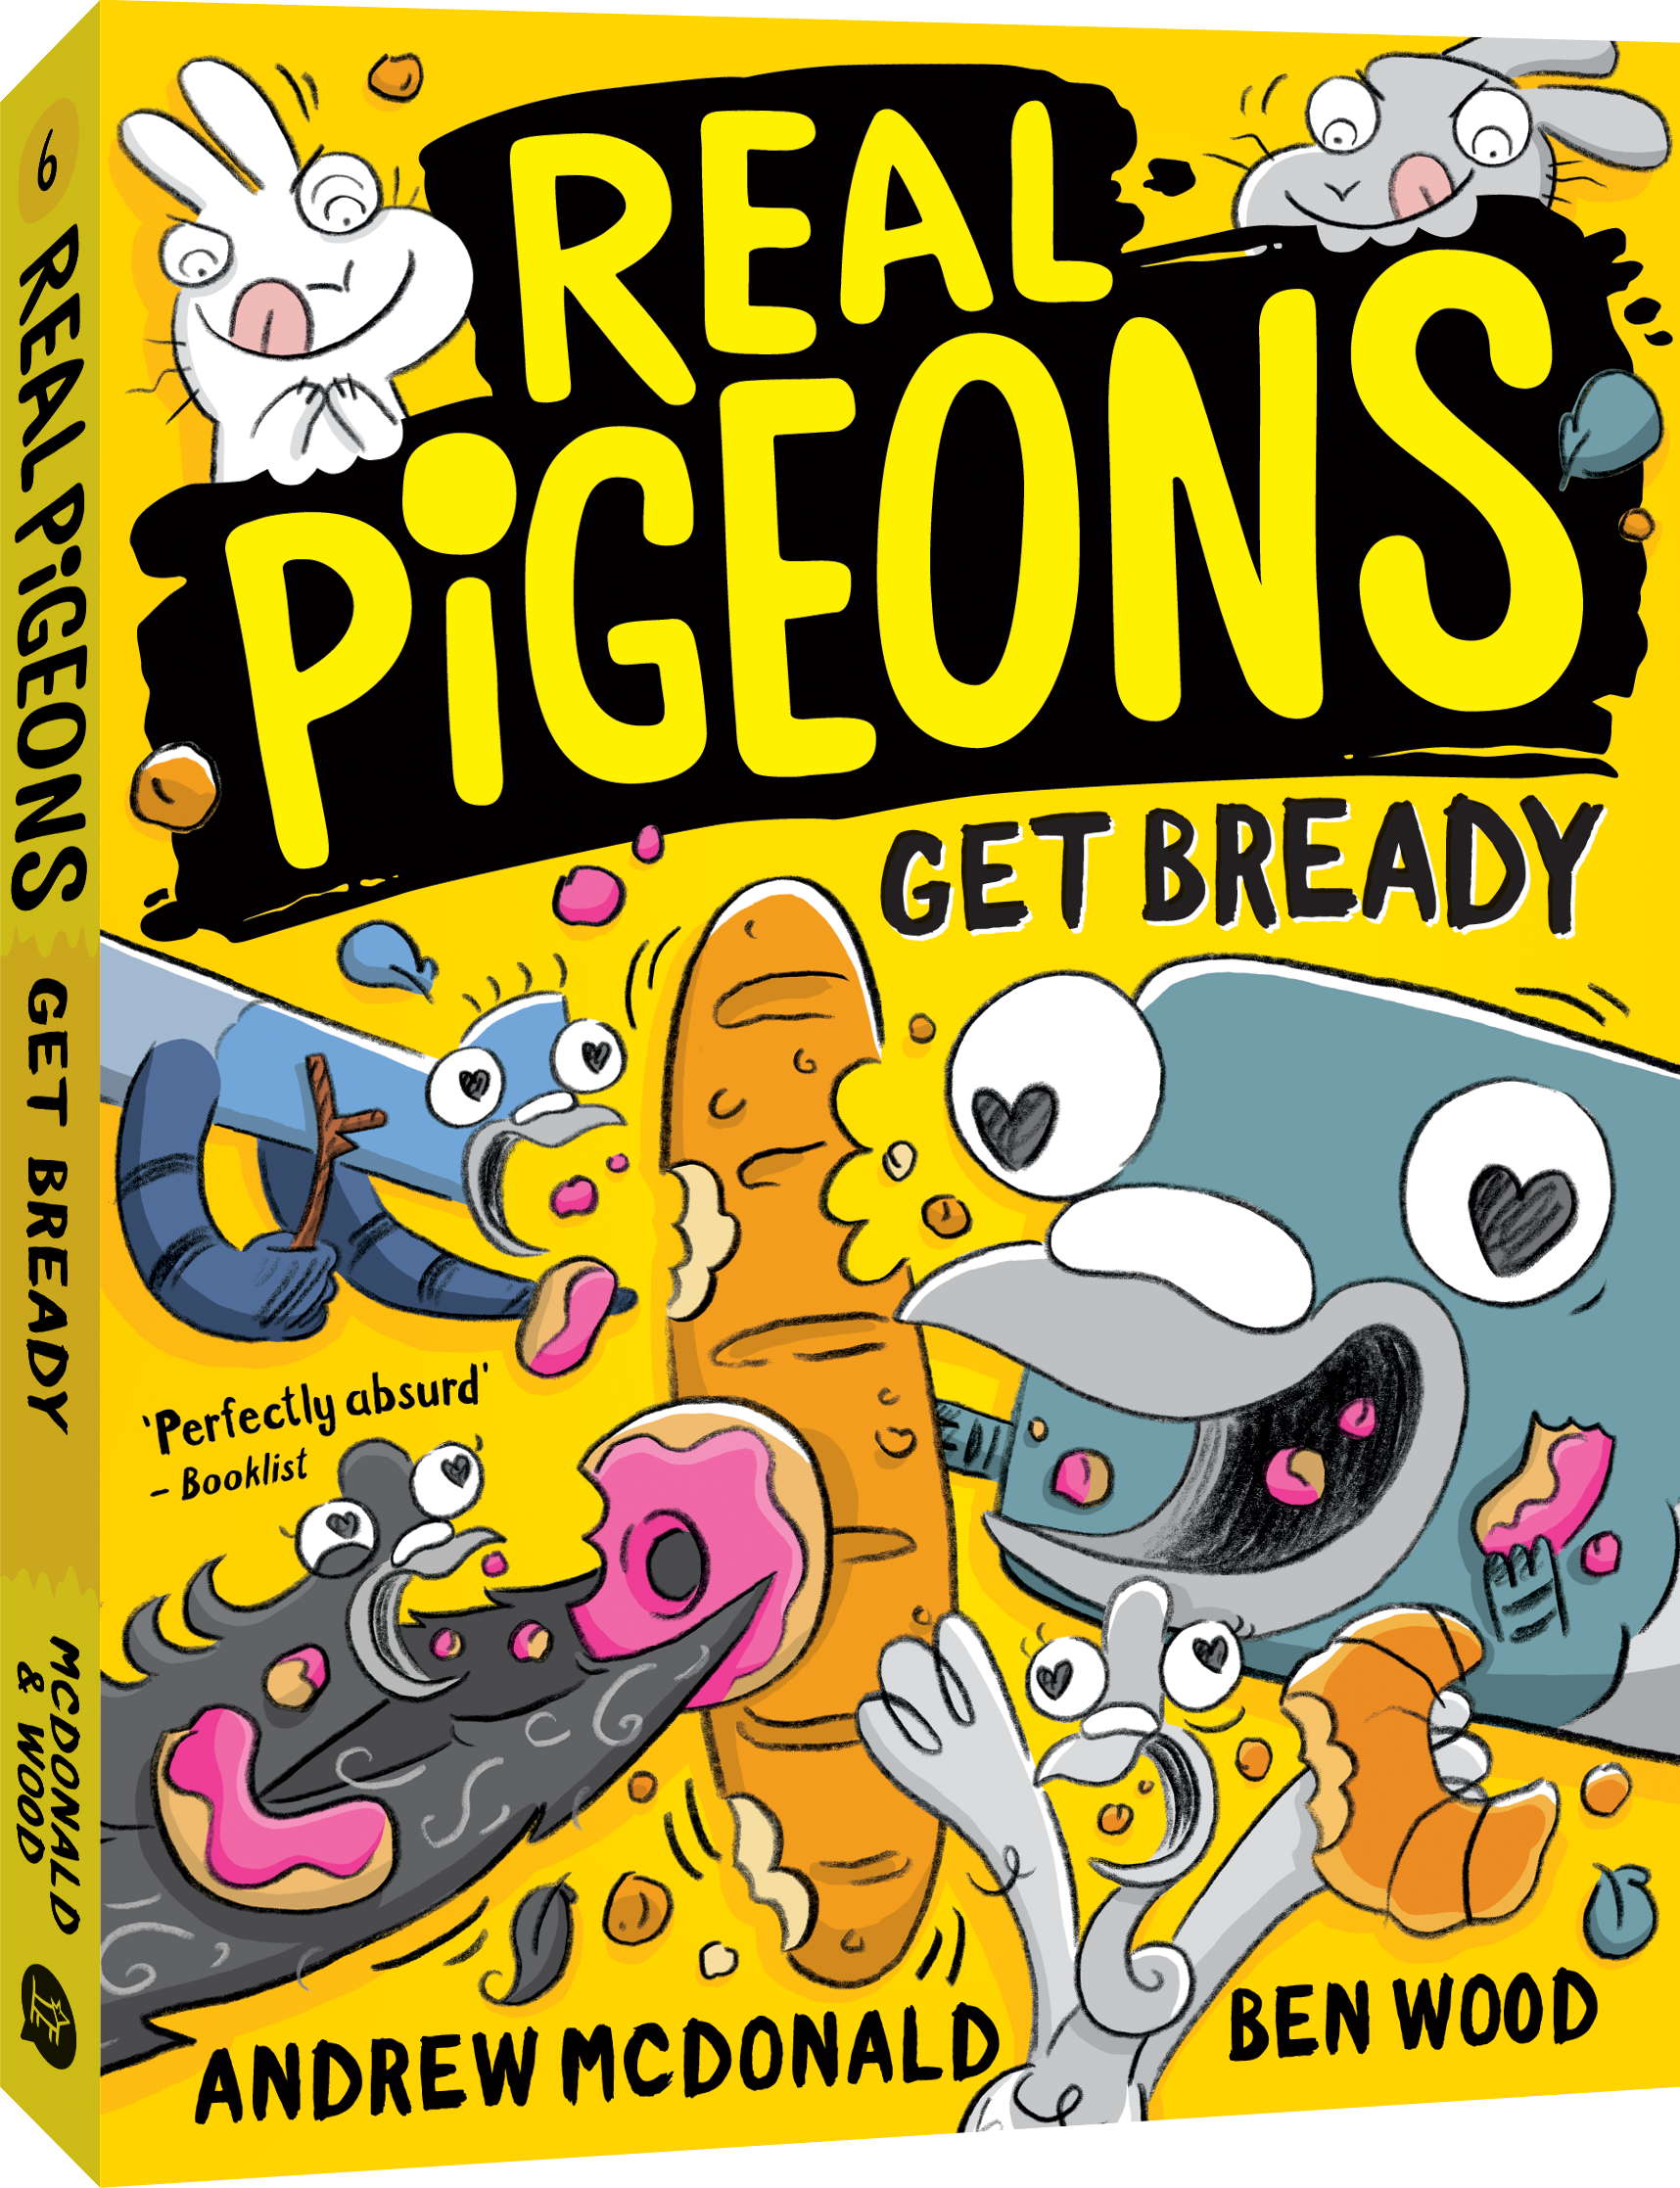 Real Pigeons Get Bready (Book 6) by Andrew McDonald and Ben Wood